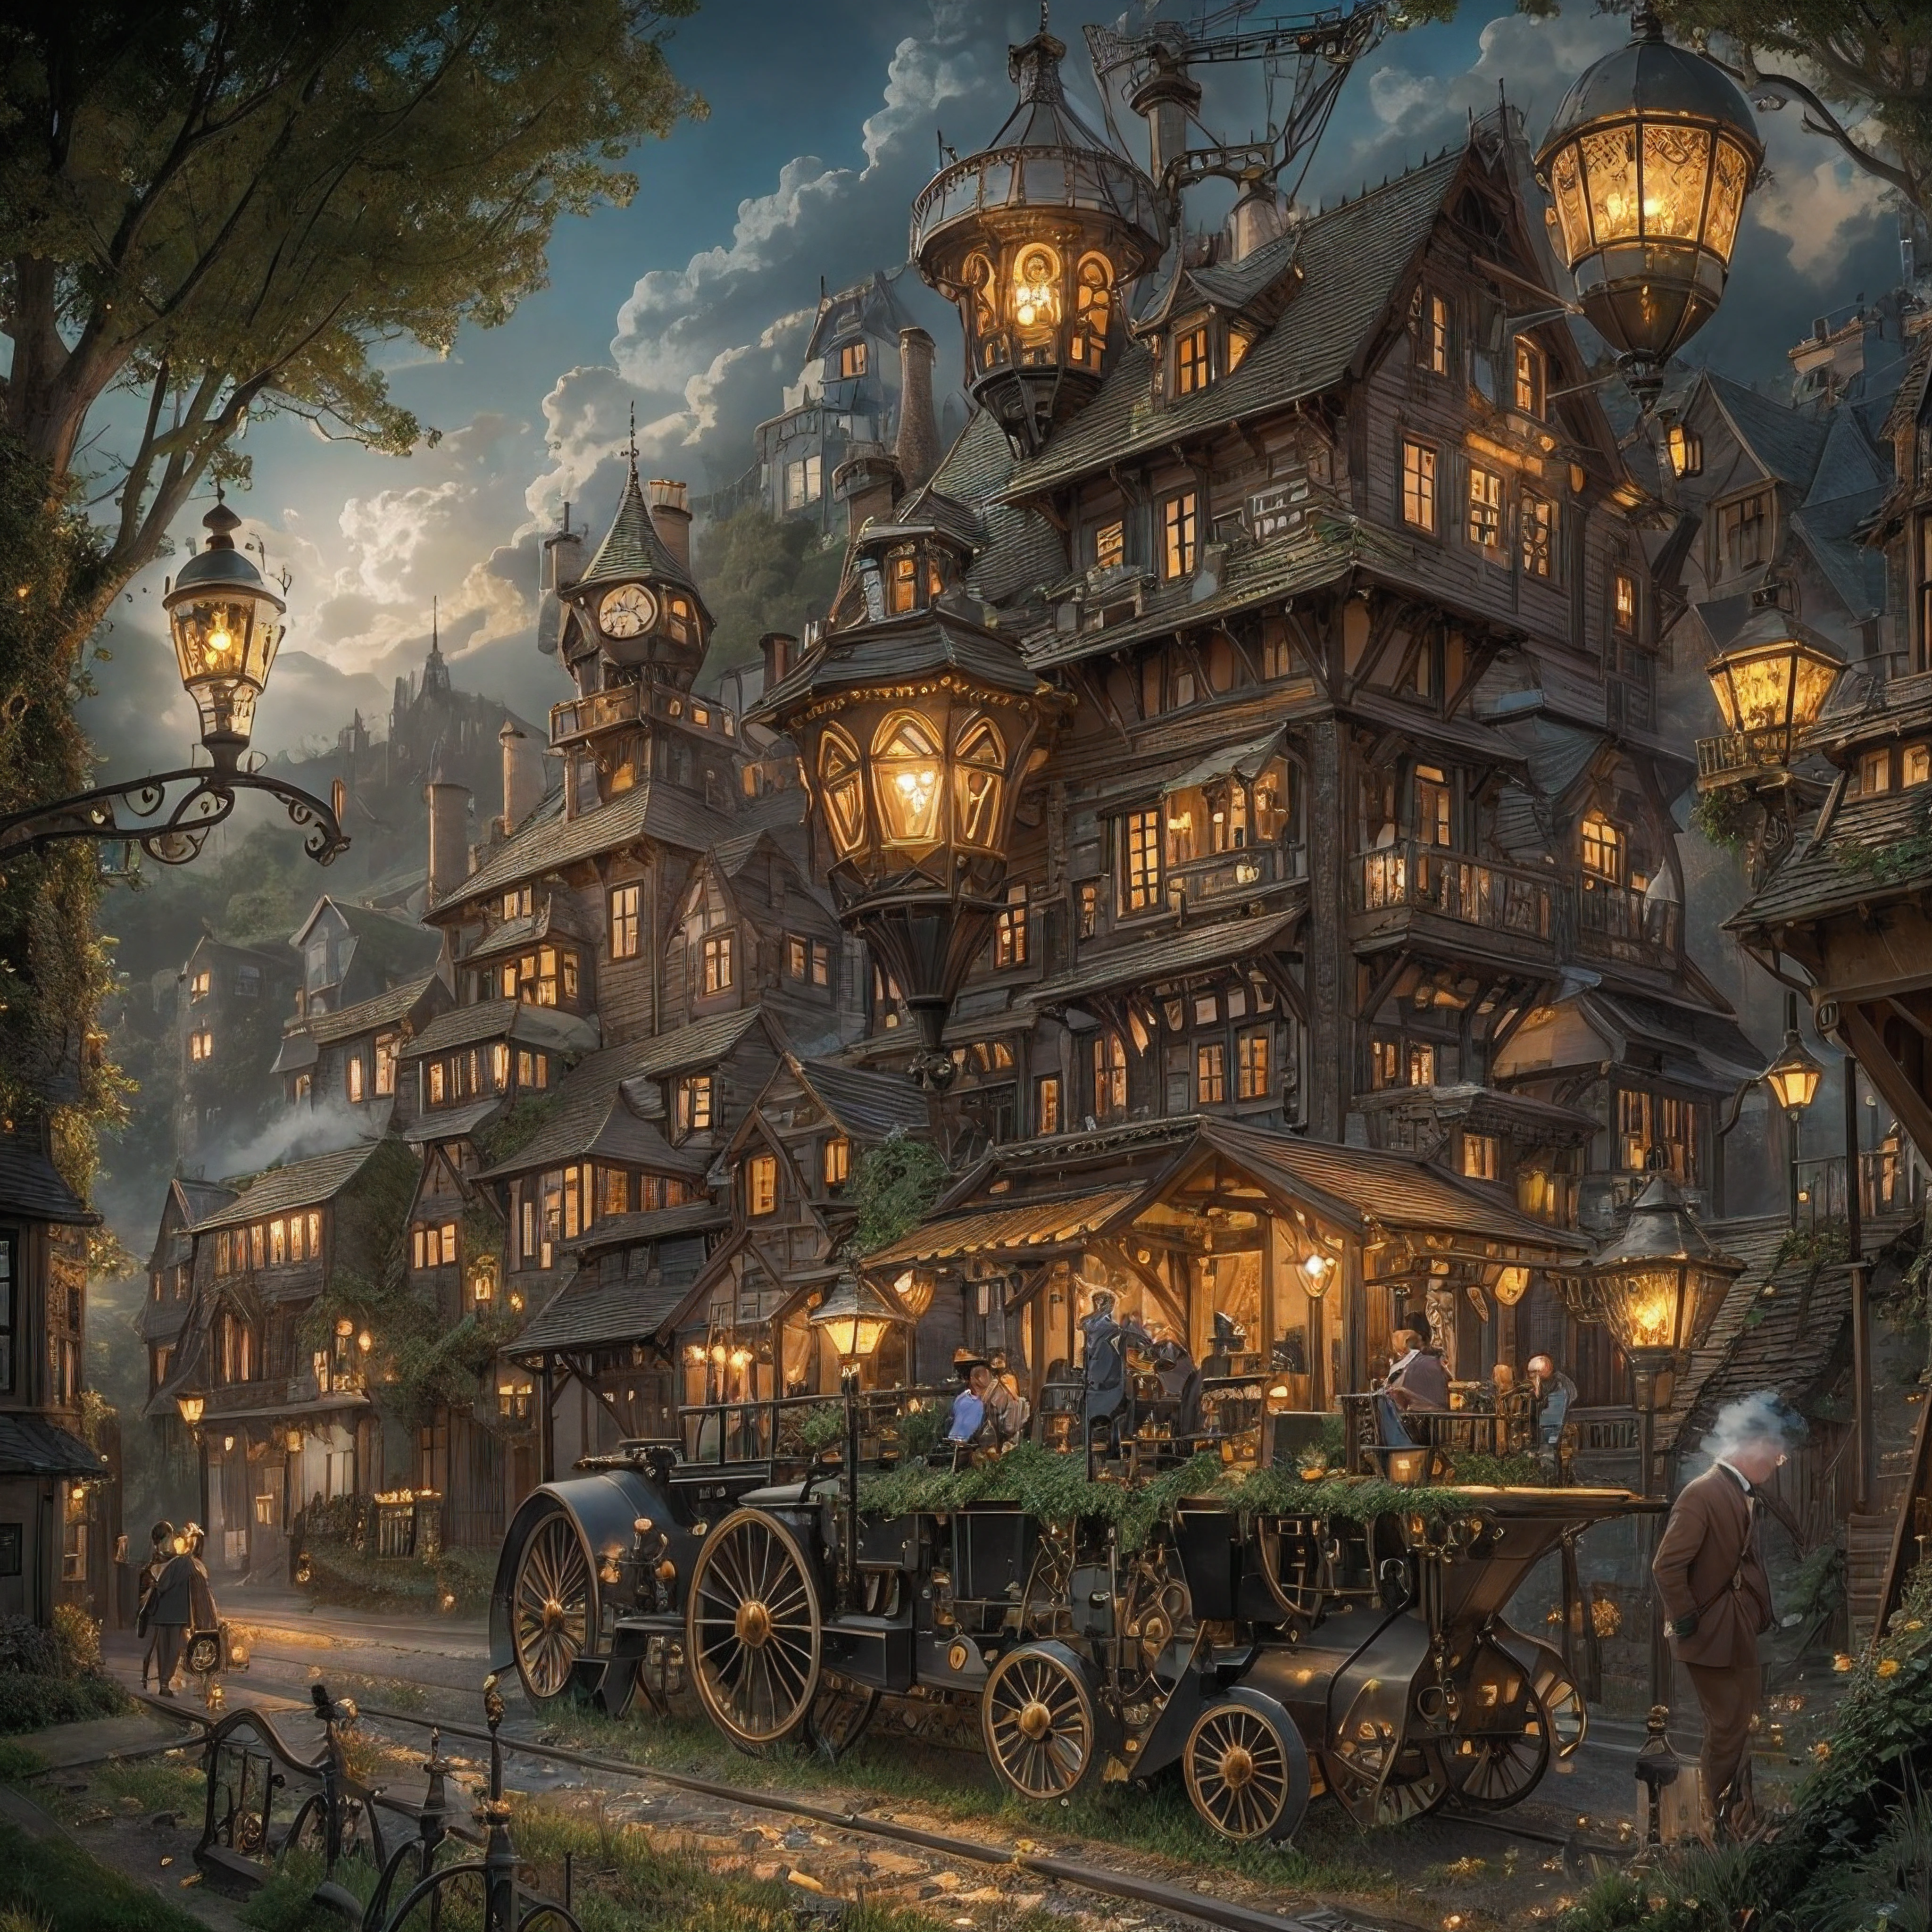 Maybe this… Quaint steampunk fantasy magical village nestled in a verdant valley, surrounded by rolling green hills. Rustic cobblestone streets winding between charming Victorian-style buildings. Plumes of steam rising from clockwork machinery. Wrought iron lamp posts line the streets, illuminated by flickering gas lamps that cast a warm glow at dusk.
In the town square, a towering clocktower looms over the scene, intricate gears shifting as the hands tick steadily. People mill about in steampunk attire - gentlemen in waistcoats and top hats, ladies in corseted dresses and feathers. Fantastical mechanical creatures amble down the lanes as villagers go about their daily business.
The village outskirts fade into vibrant green farmlands. Farmer’s fields are dotted with automated steam-powered harvesters, puffing as they roll through the crops. Herds of whimsical mechanized sheep and cows graze on the hillsides. Above the valley, majestic airships drift by on the breeze.
As night falls, the lamps brighten and villagers gather at the local tavern. Laughter and music spill out into the streets where the fantasy world comes alive. Magic seems to shimmer in the moonlight. This quaint steampunk haven appears to be frozen in time, an idyllic, enchanted realm powered by steam and imagination.